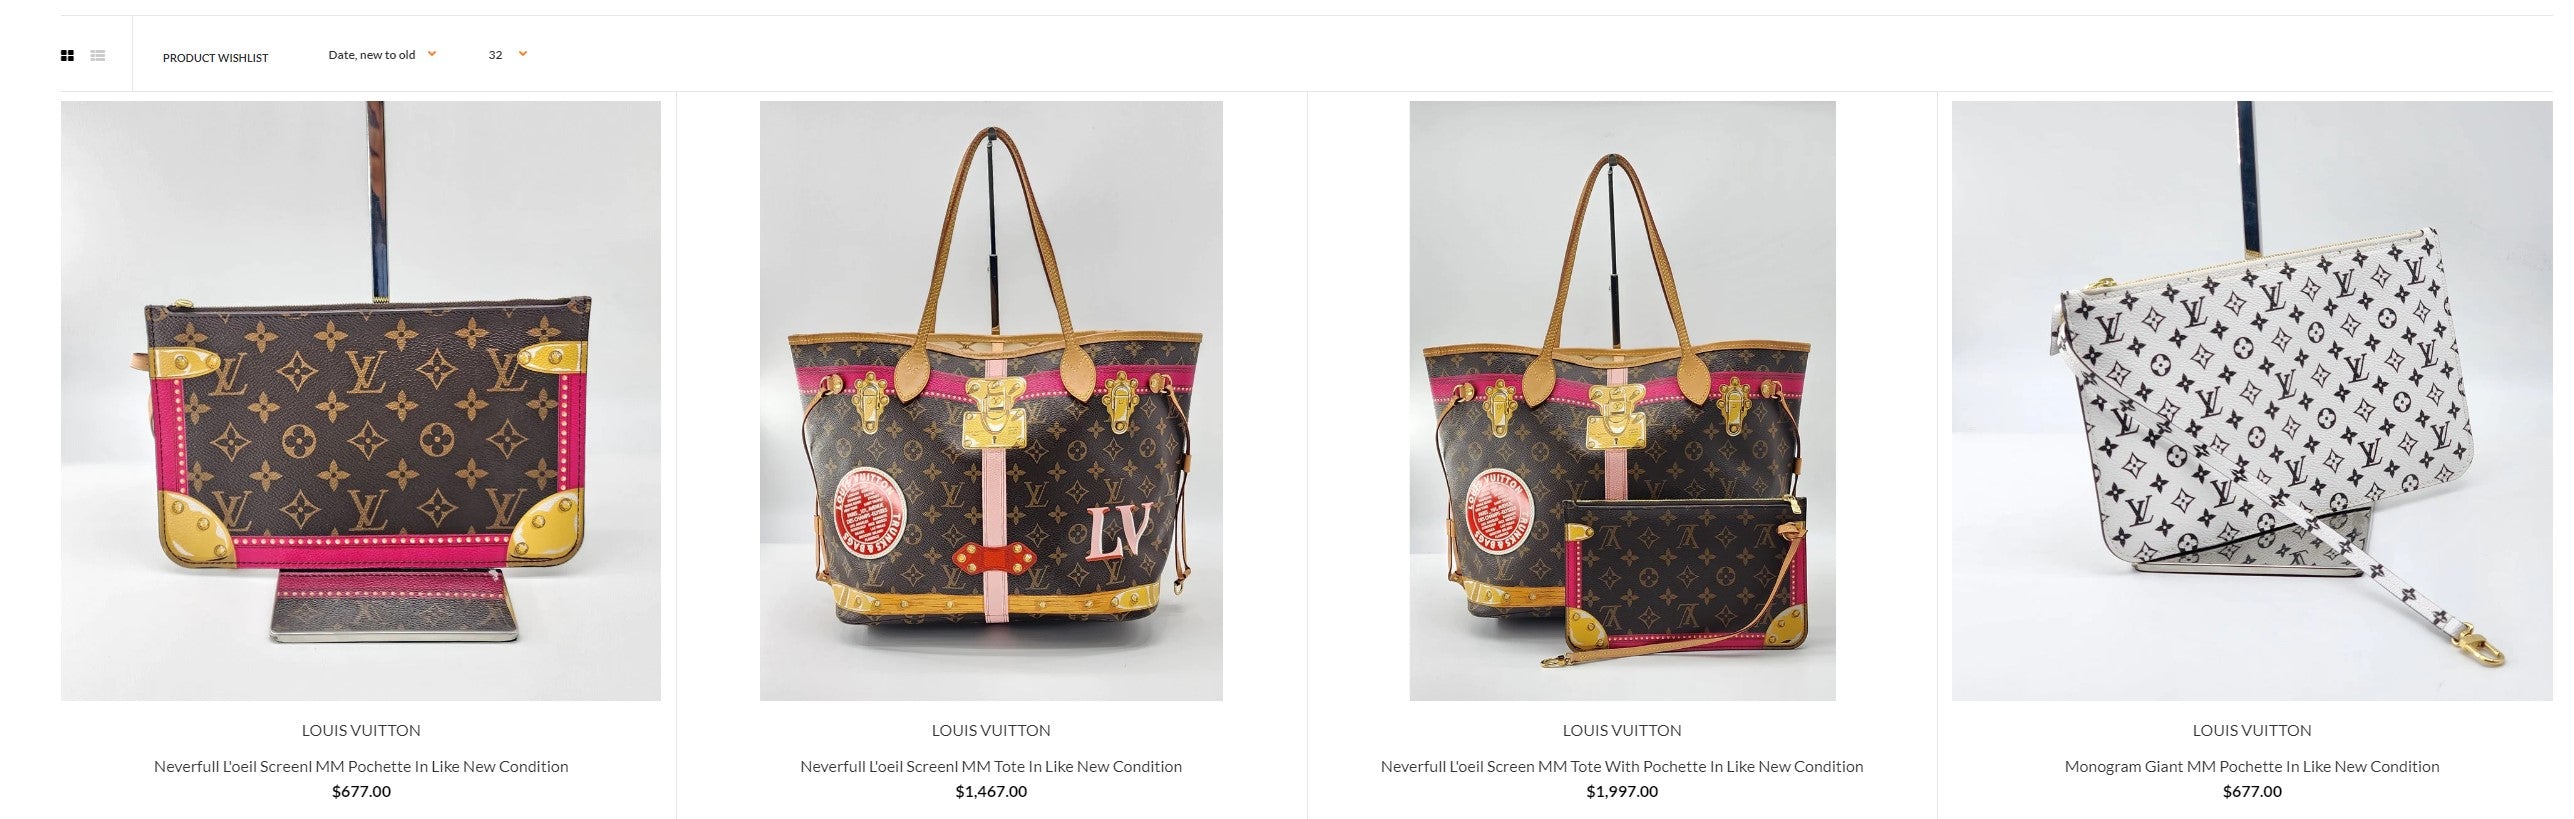 Louis Vuitton Bags: The Ultimate Holiday Gift